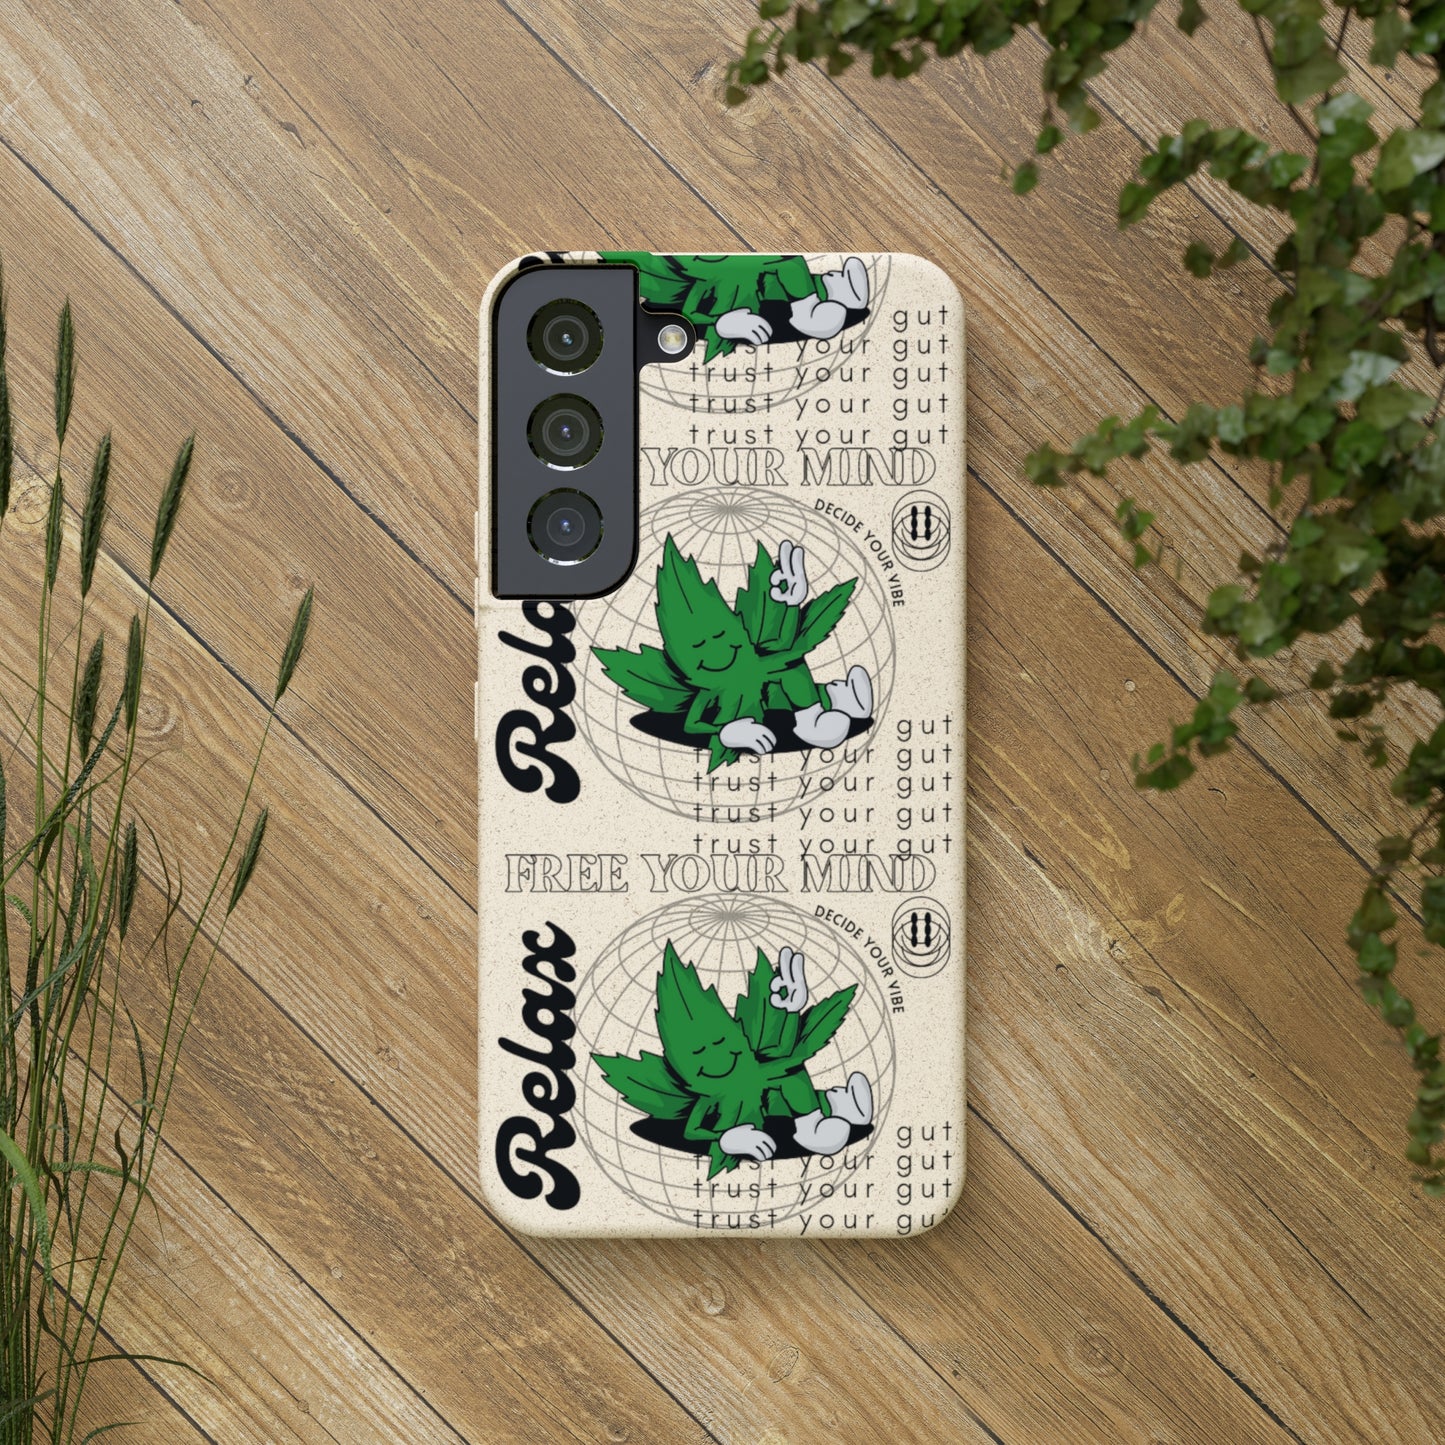 For the High Herb Biodegradable Phone Case